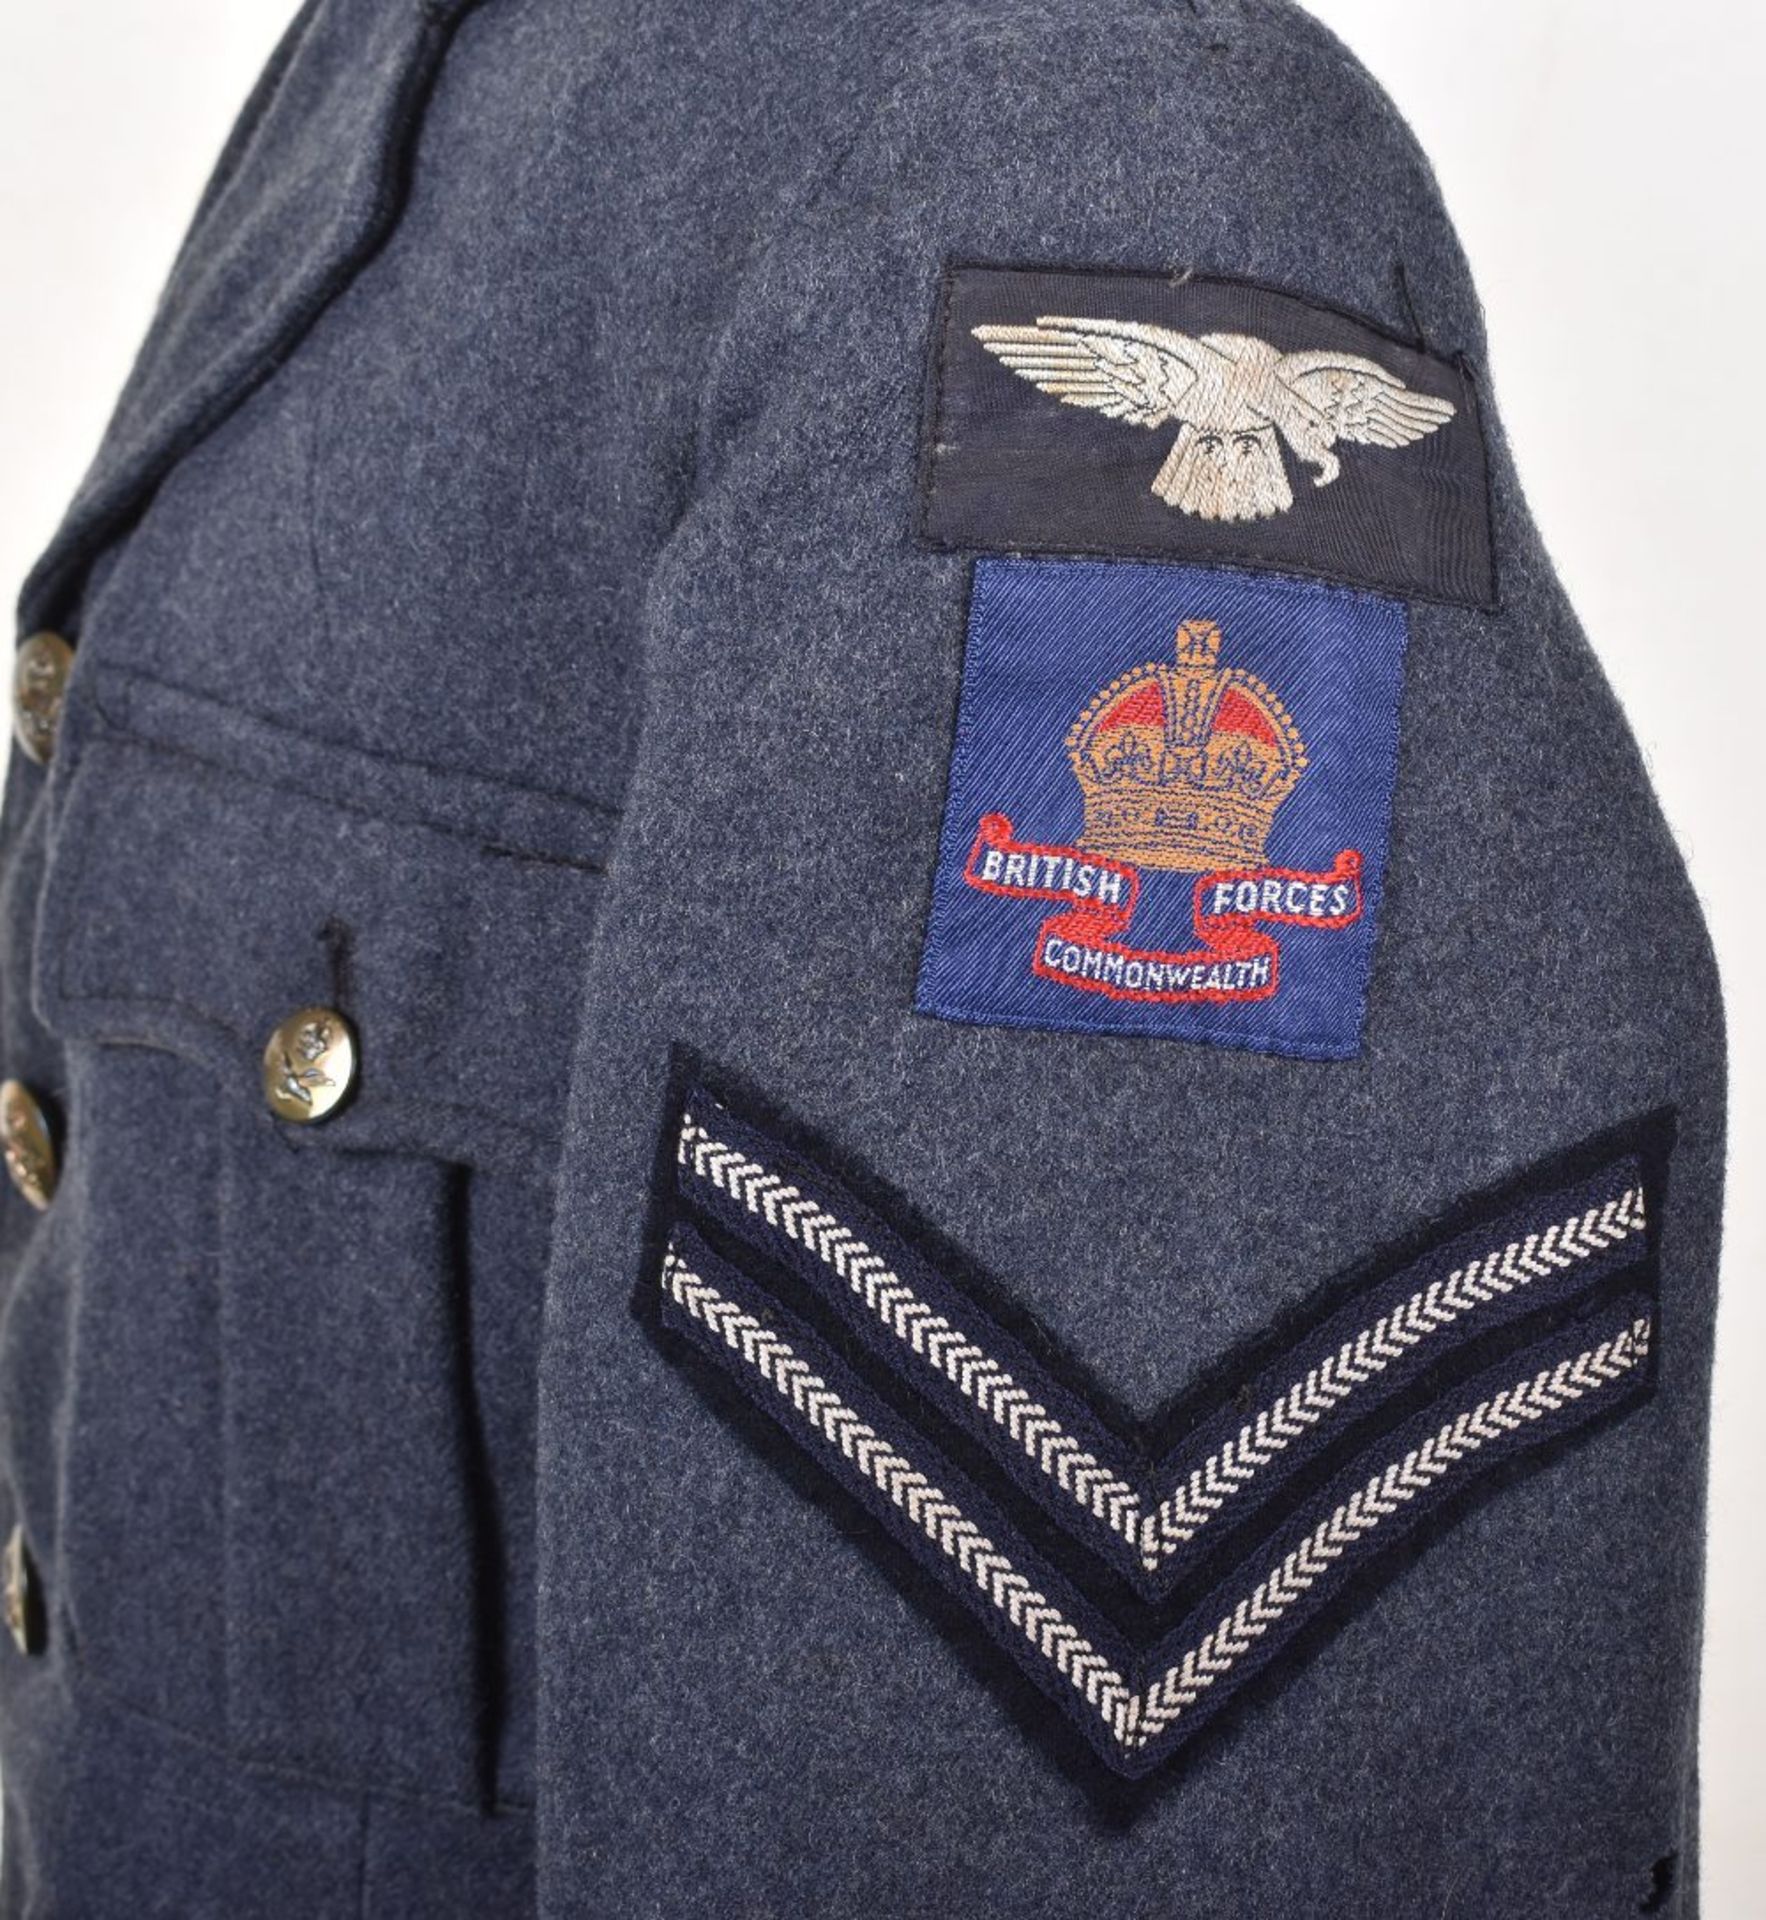 Scarce Royal Air Force Other Ranks Tunic with Insignia for British Commonwealth Occupation Force Jap - Image 5 of 10